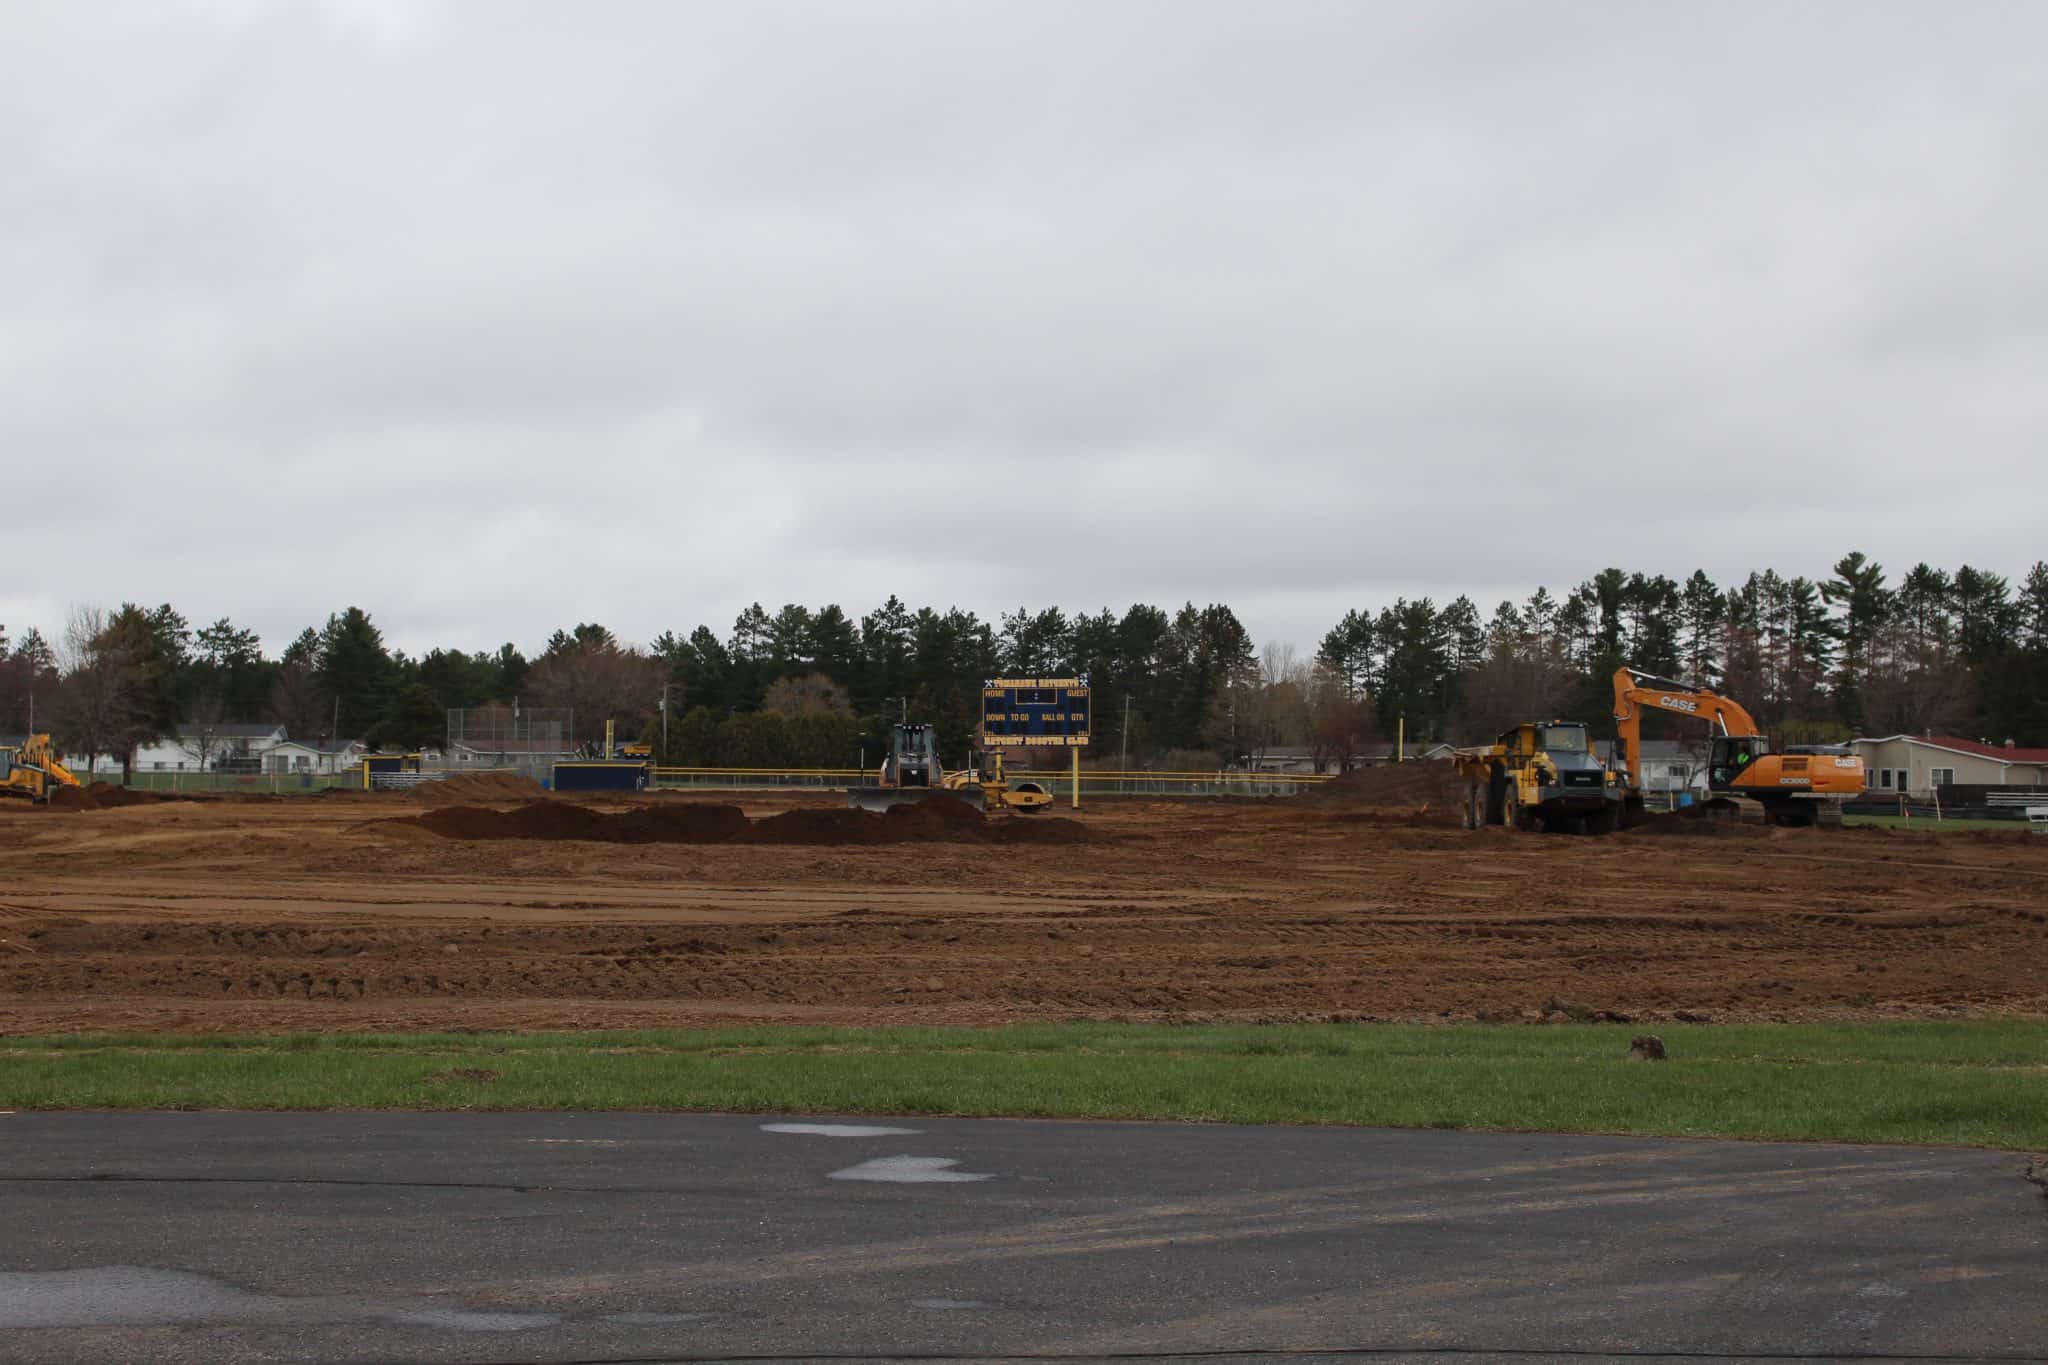 Construction begins on new Hatchet Field as Hatchet Pride Project continues seeking support: Improvements totaling $2.25 million being made include new field, track and bleachers